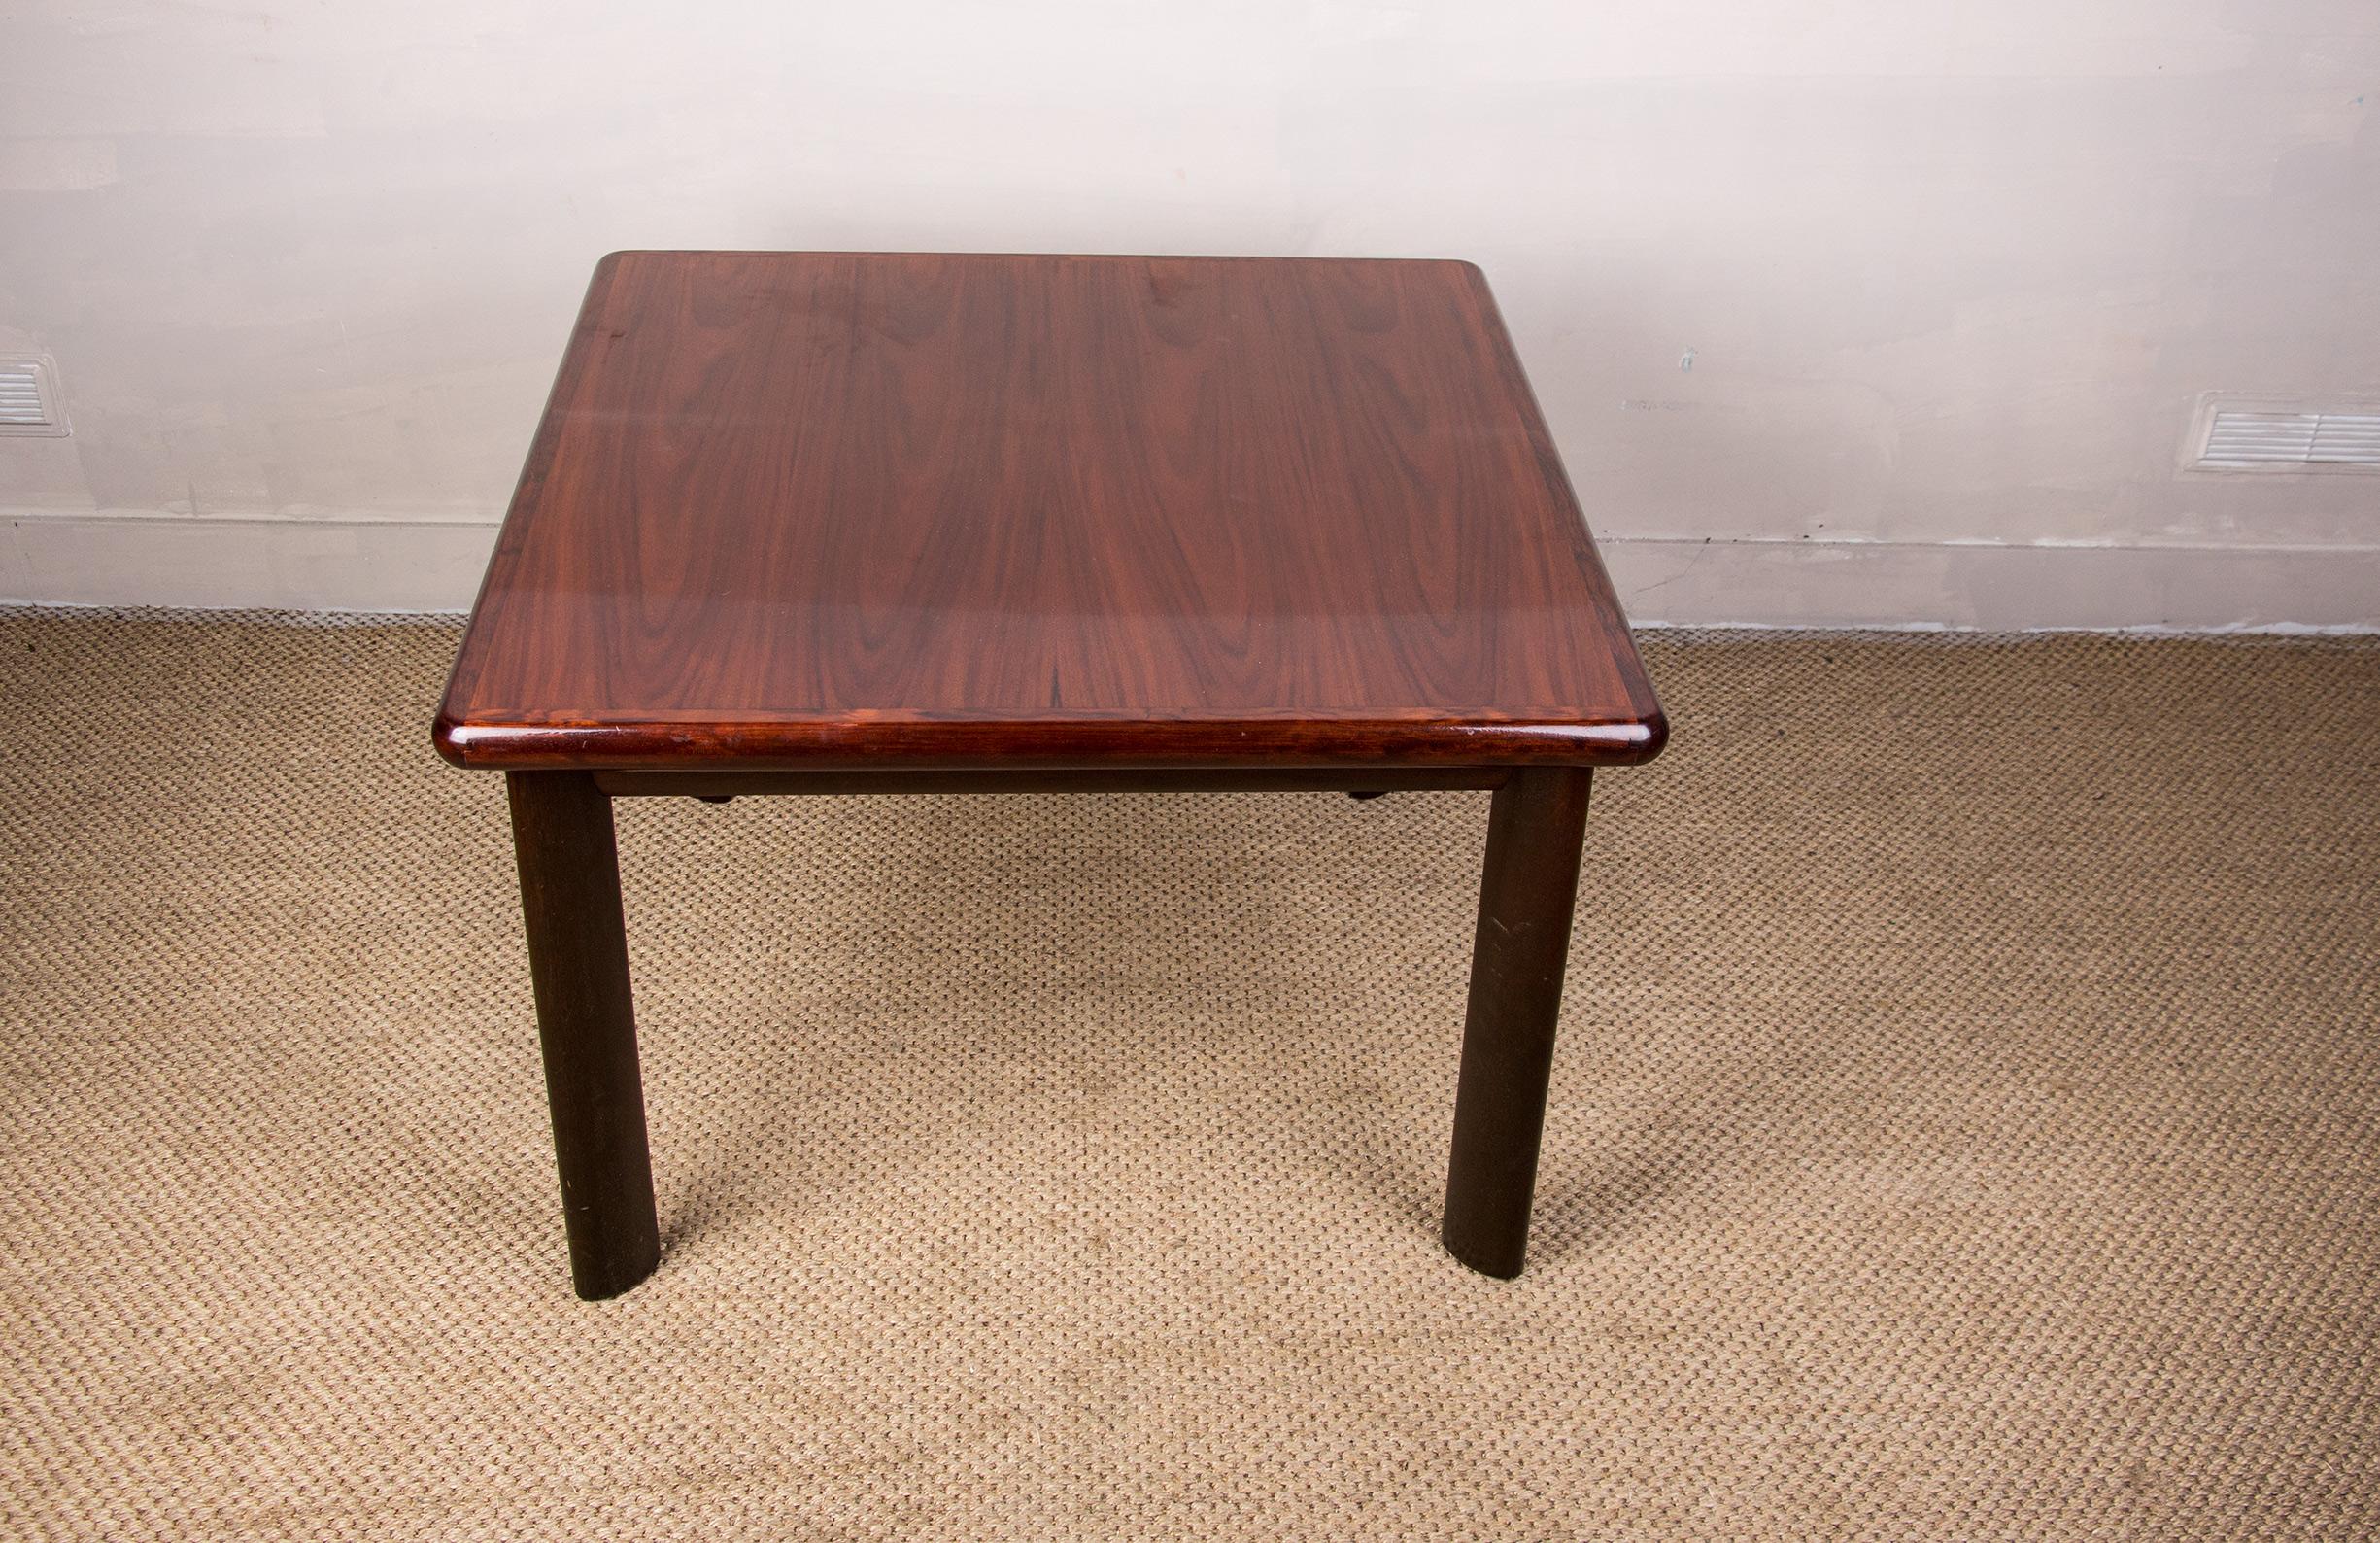 Elegant square-shaped coffee table with clean lines. Manufacture of very good quality.